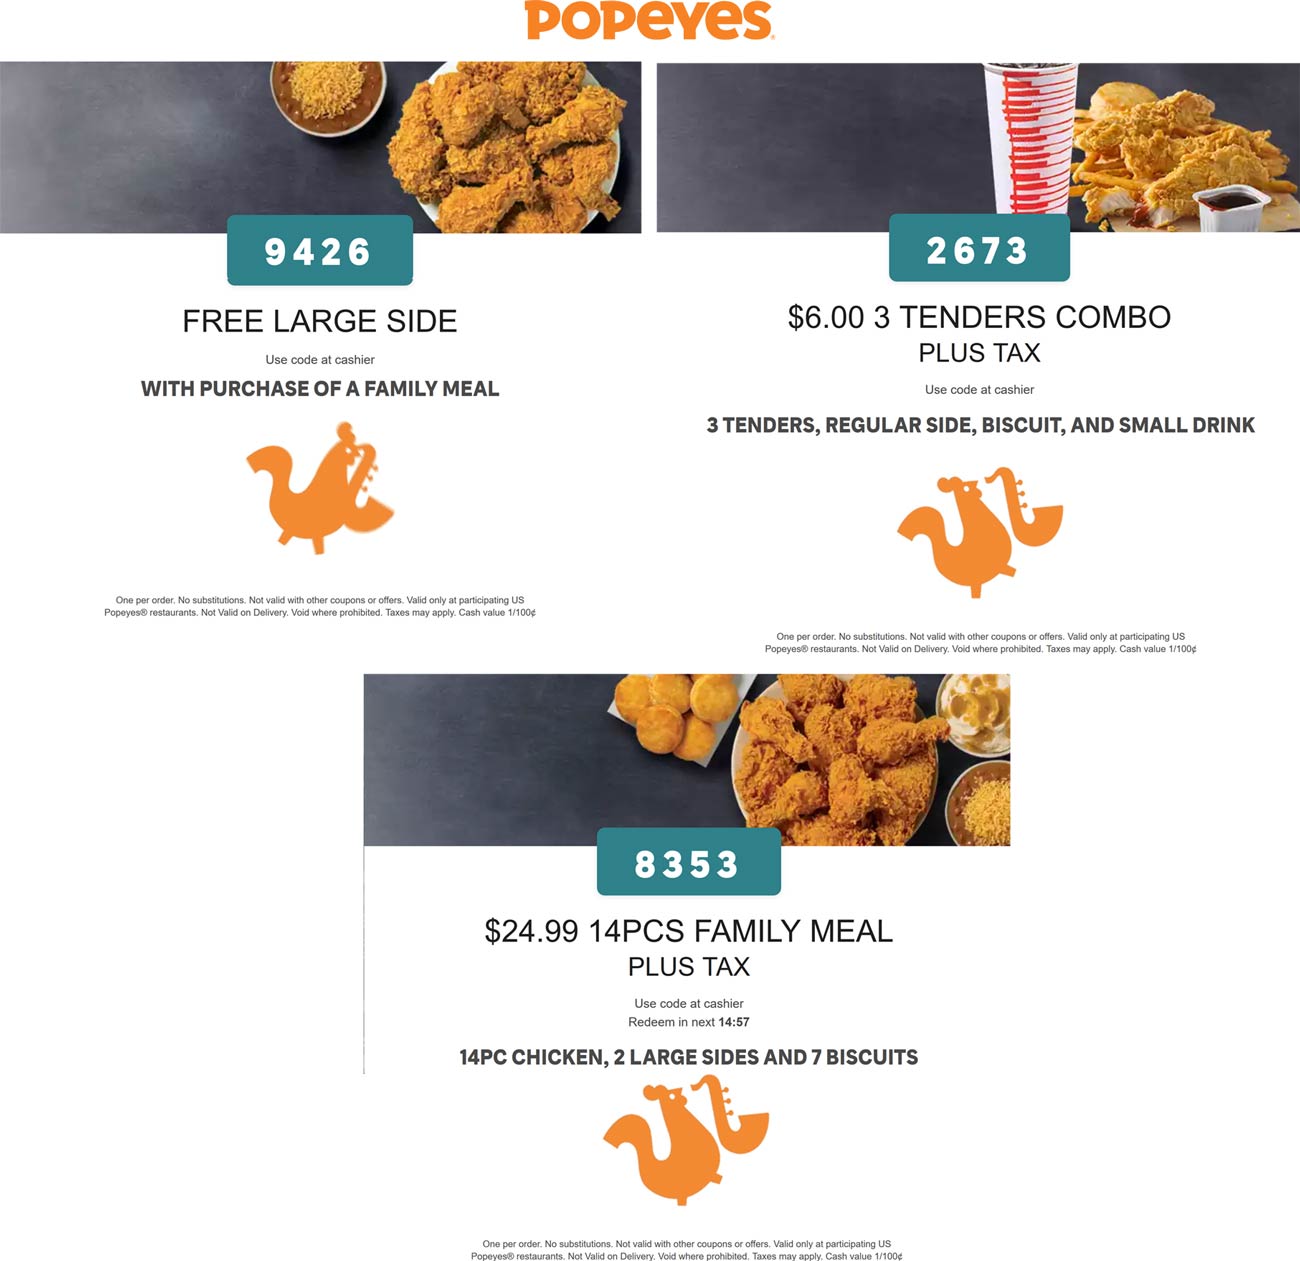 Popeyes restaurants Coupon  Free large side with family meal & more at Popeyes chicken #popeyes